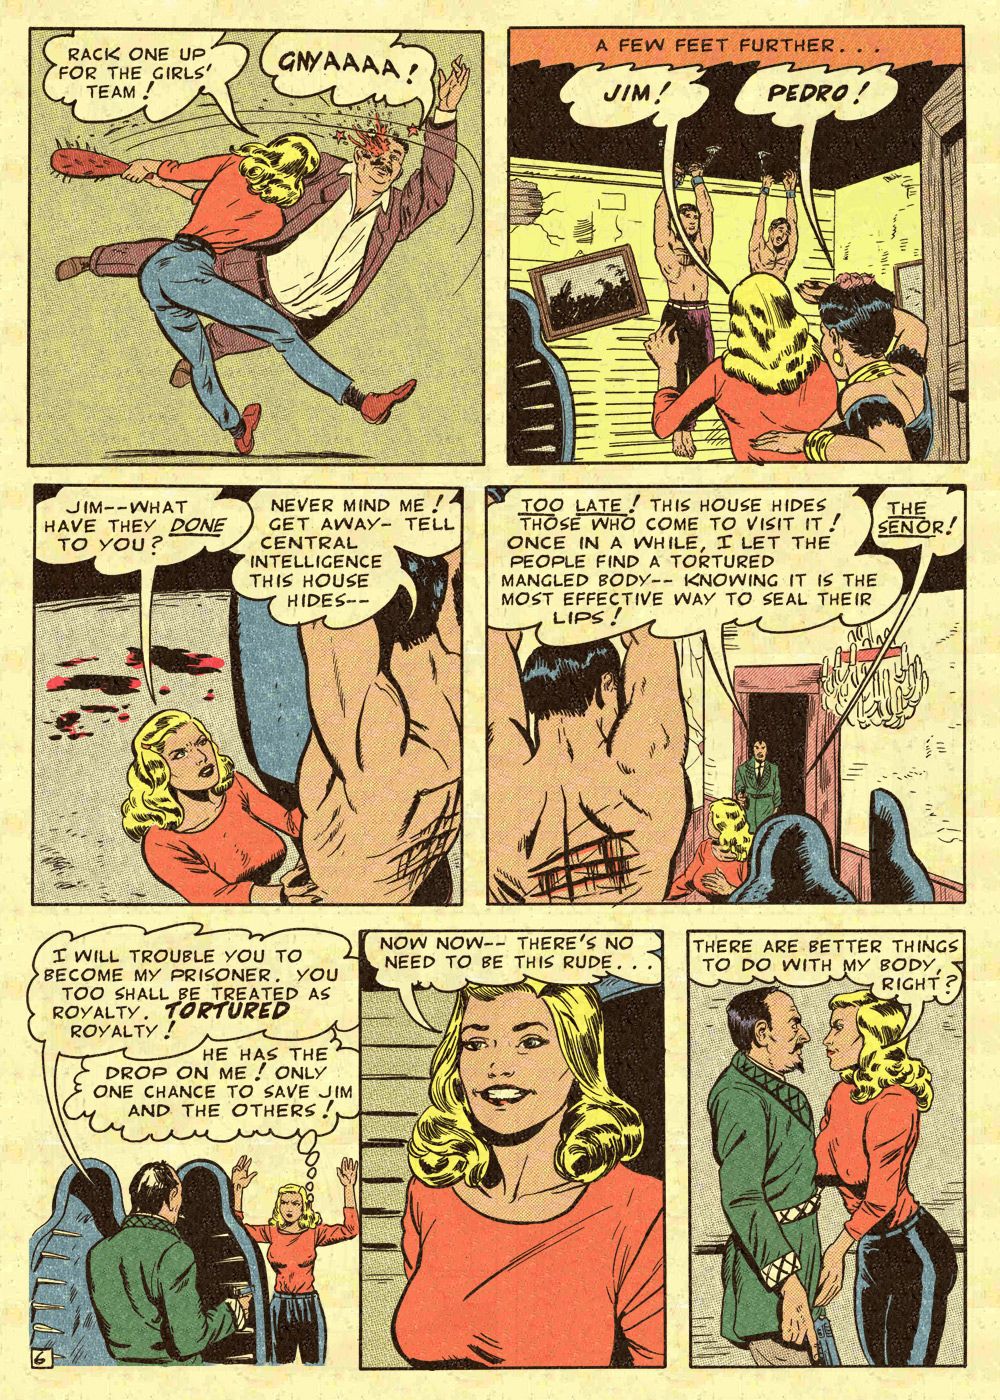 The Wertham Files Undercover Girl - part 2